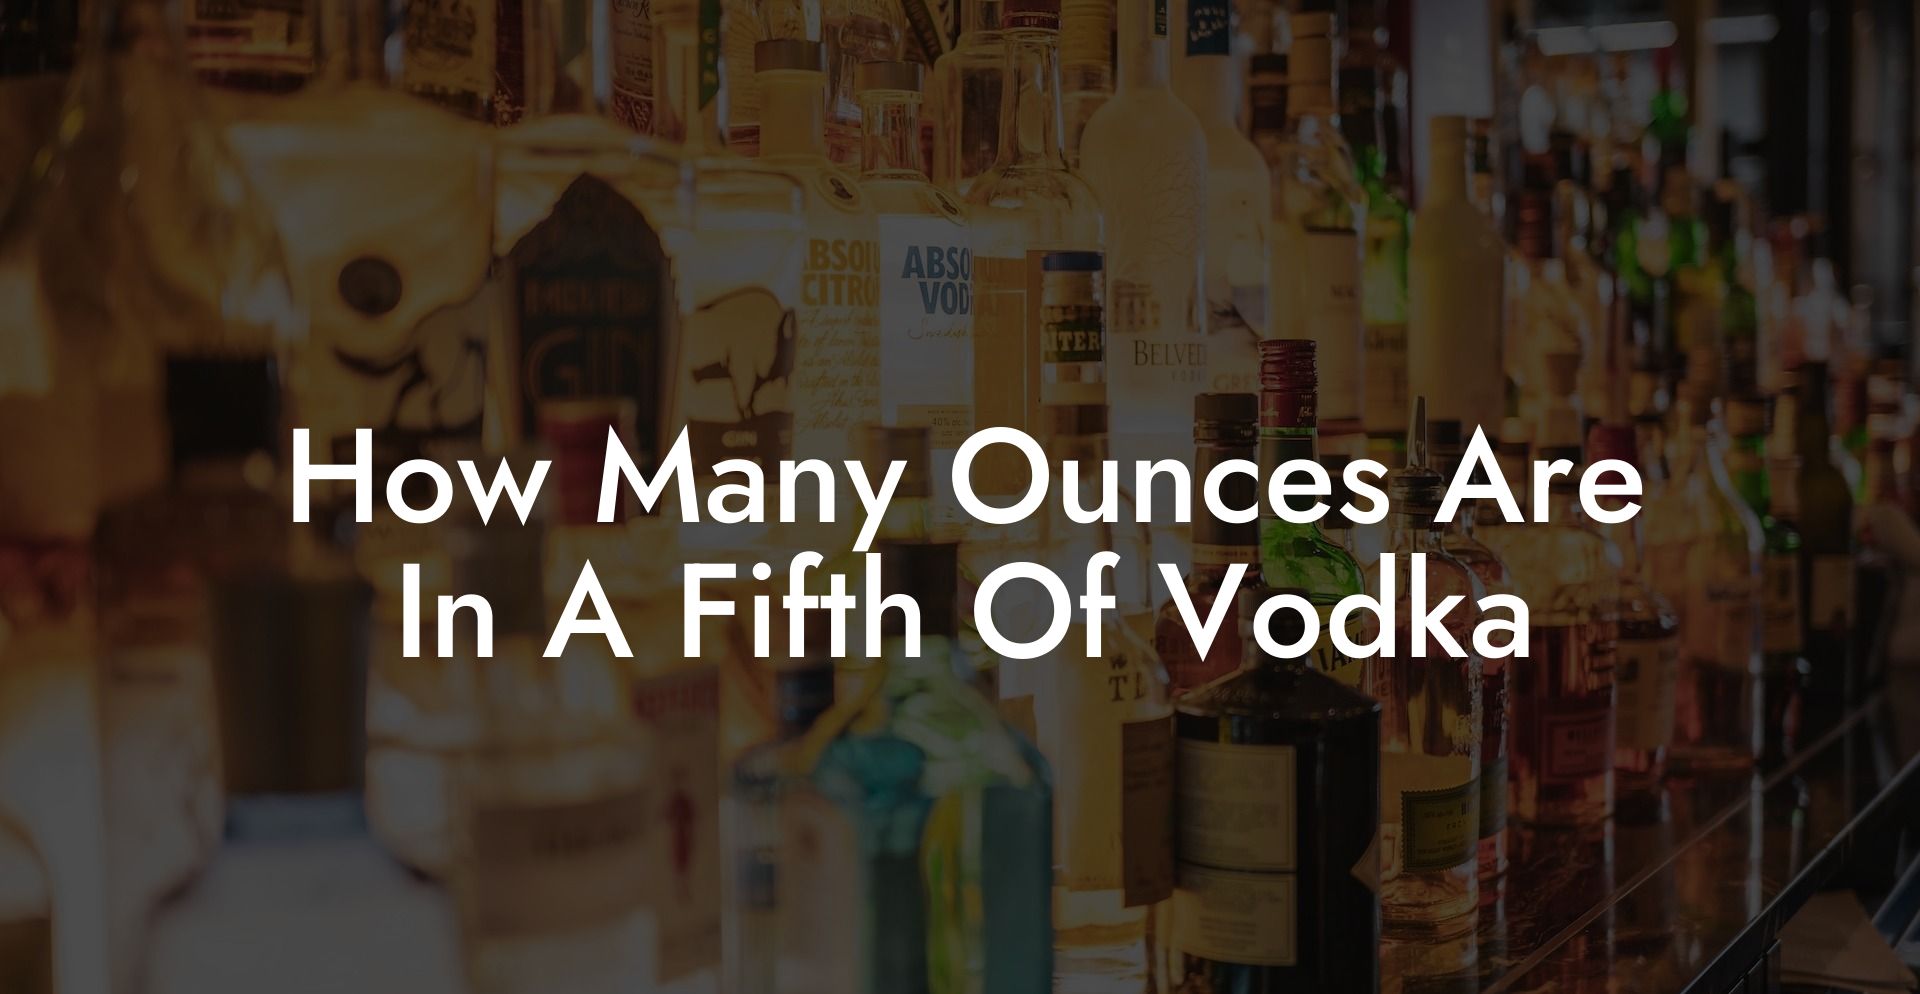 How Many Ounces Are In A Fifth Of Vodka